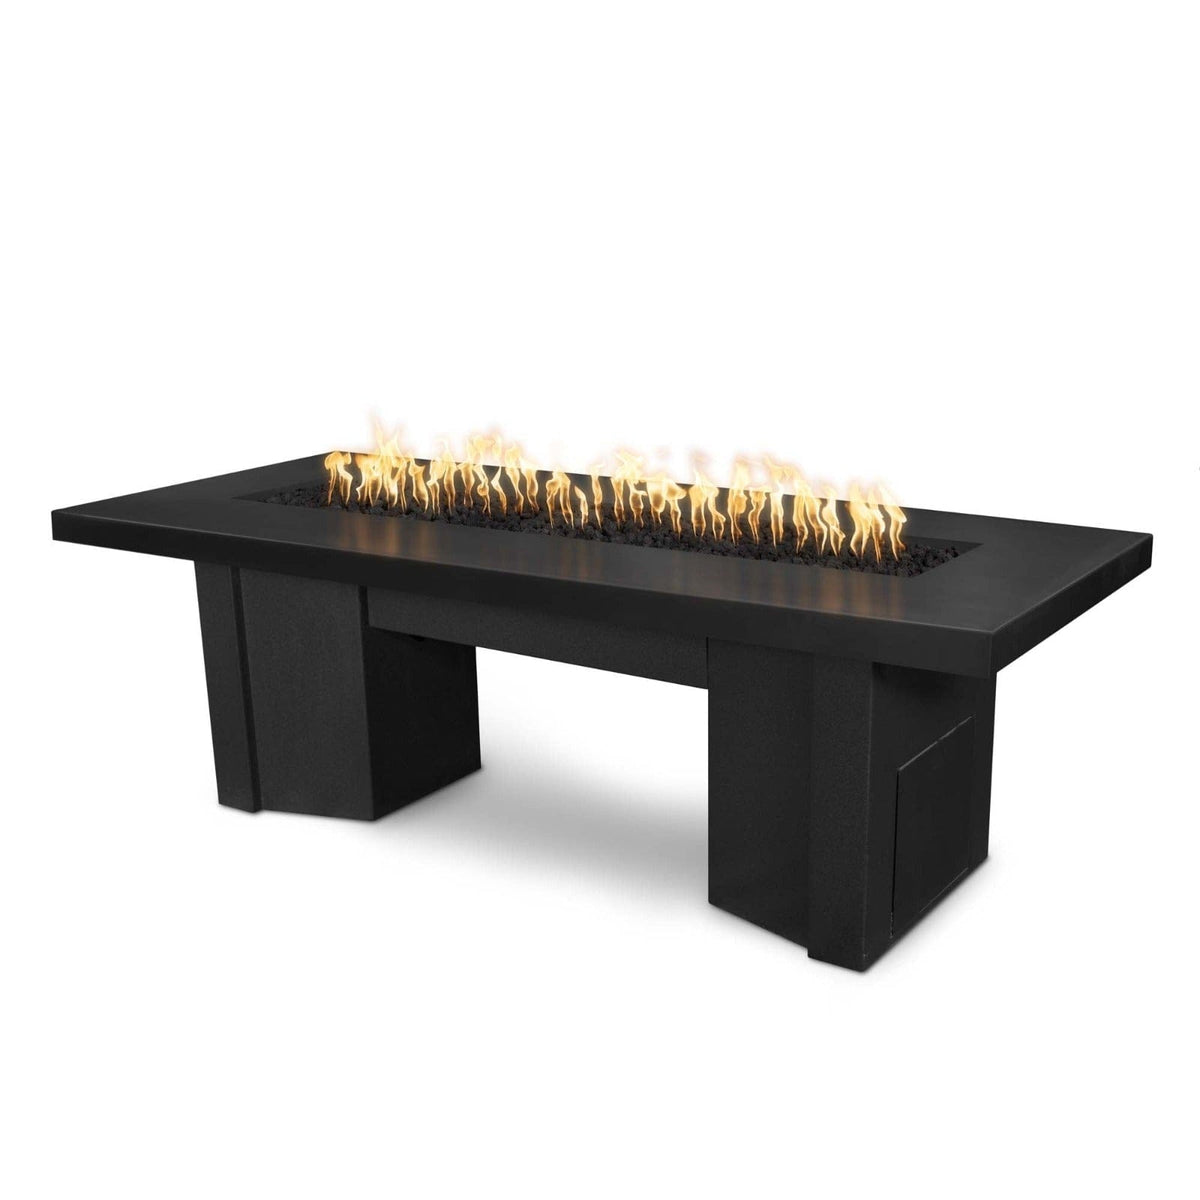 The Outdoor Plus Fire Features Black (-BLK) / Black Powder Coated Steel (-BLK) The Outdoor Plus 60&quot; Alameda Fire Table Smooth Concrete in Natural Gas - Flame Sense System with Push Button Spark Igniter / OPT-ALMGFRC60FSEN-NG